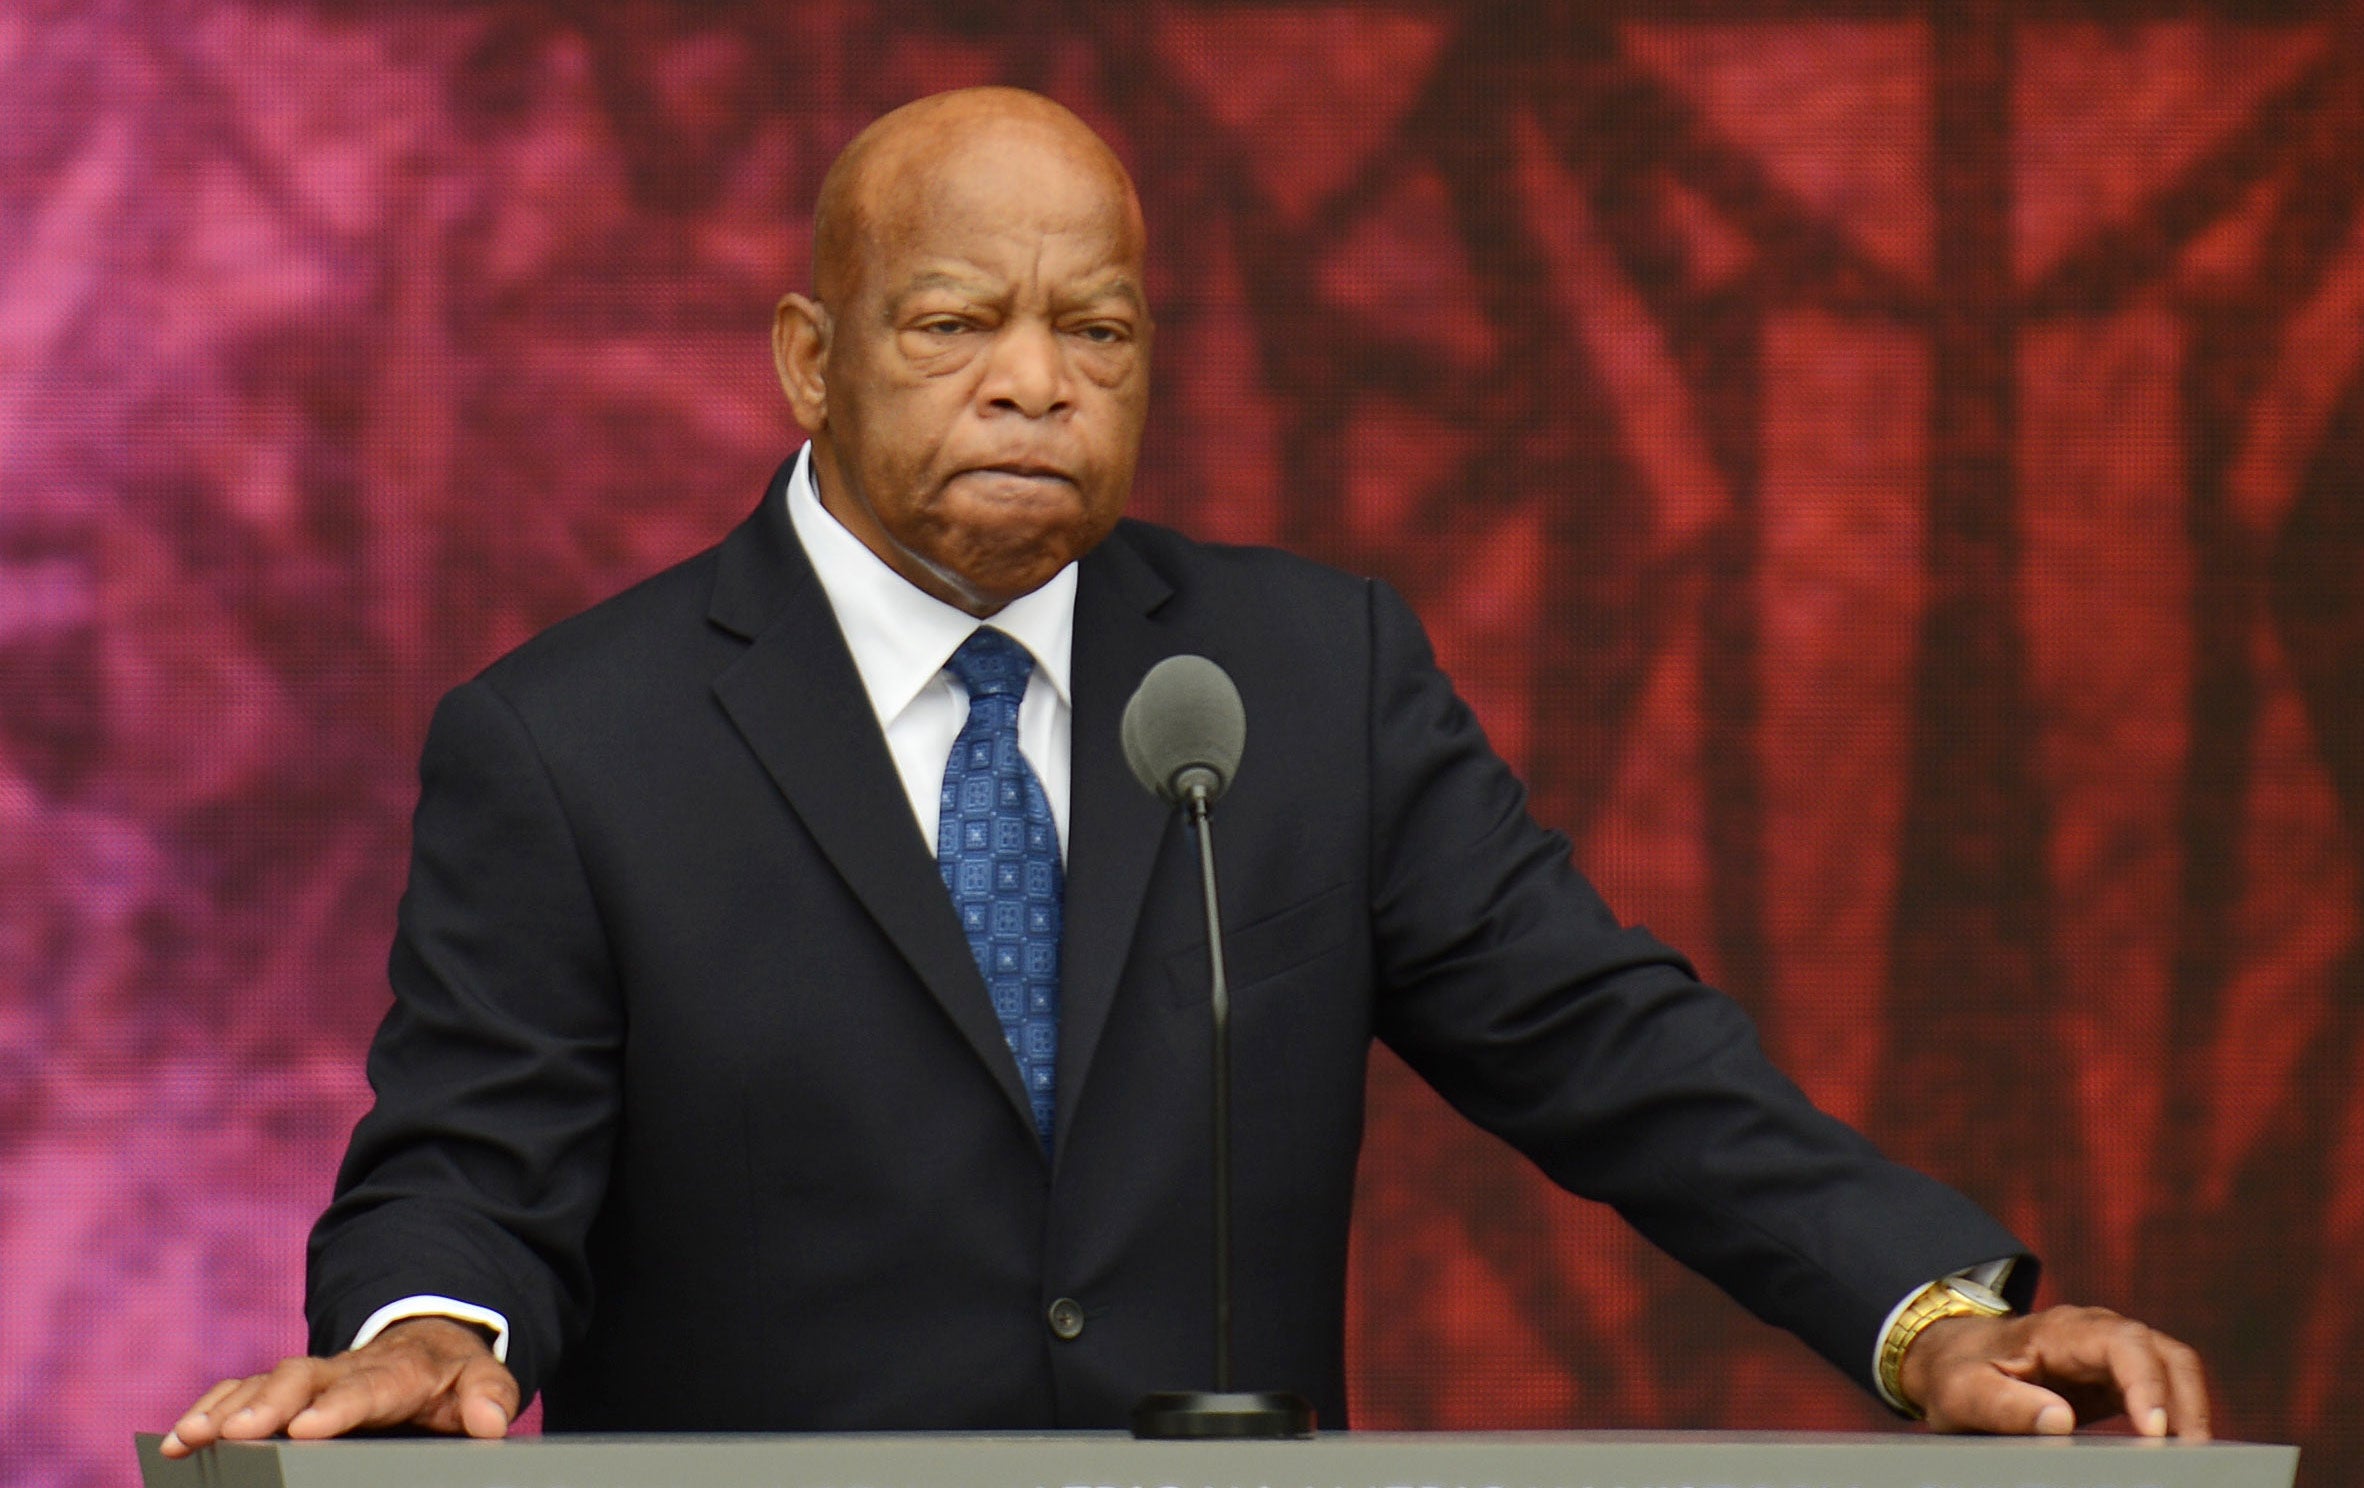 Civil Rights Leader John Lewis Urges Young People To Vote And Get In 'Good Trouble'
